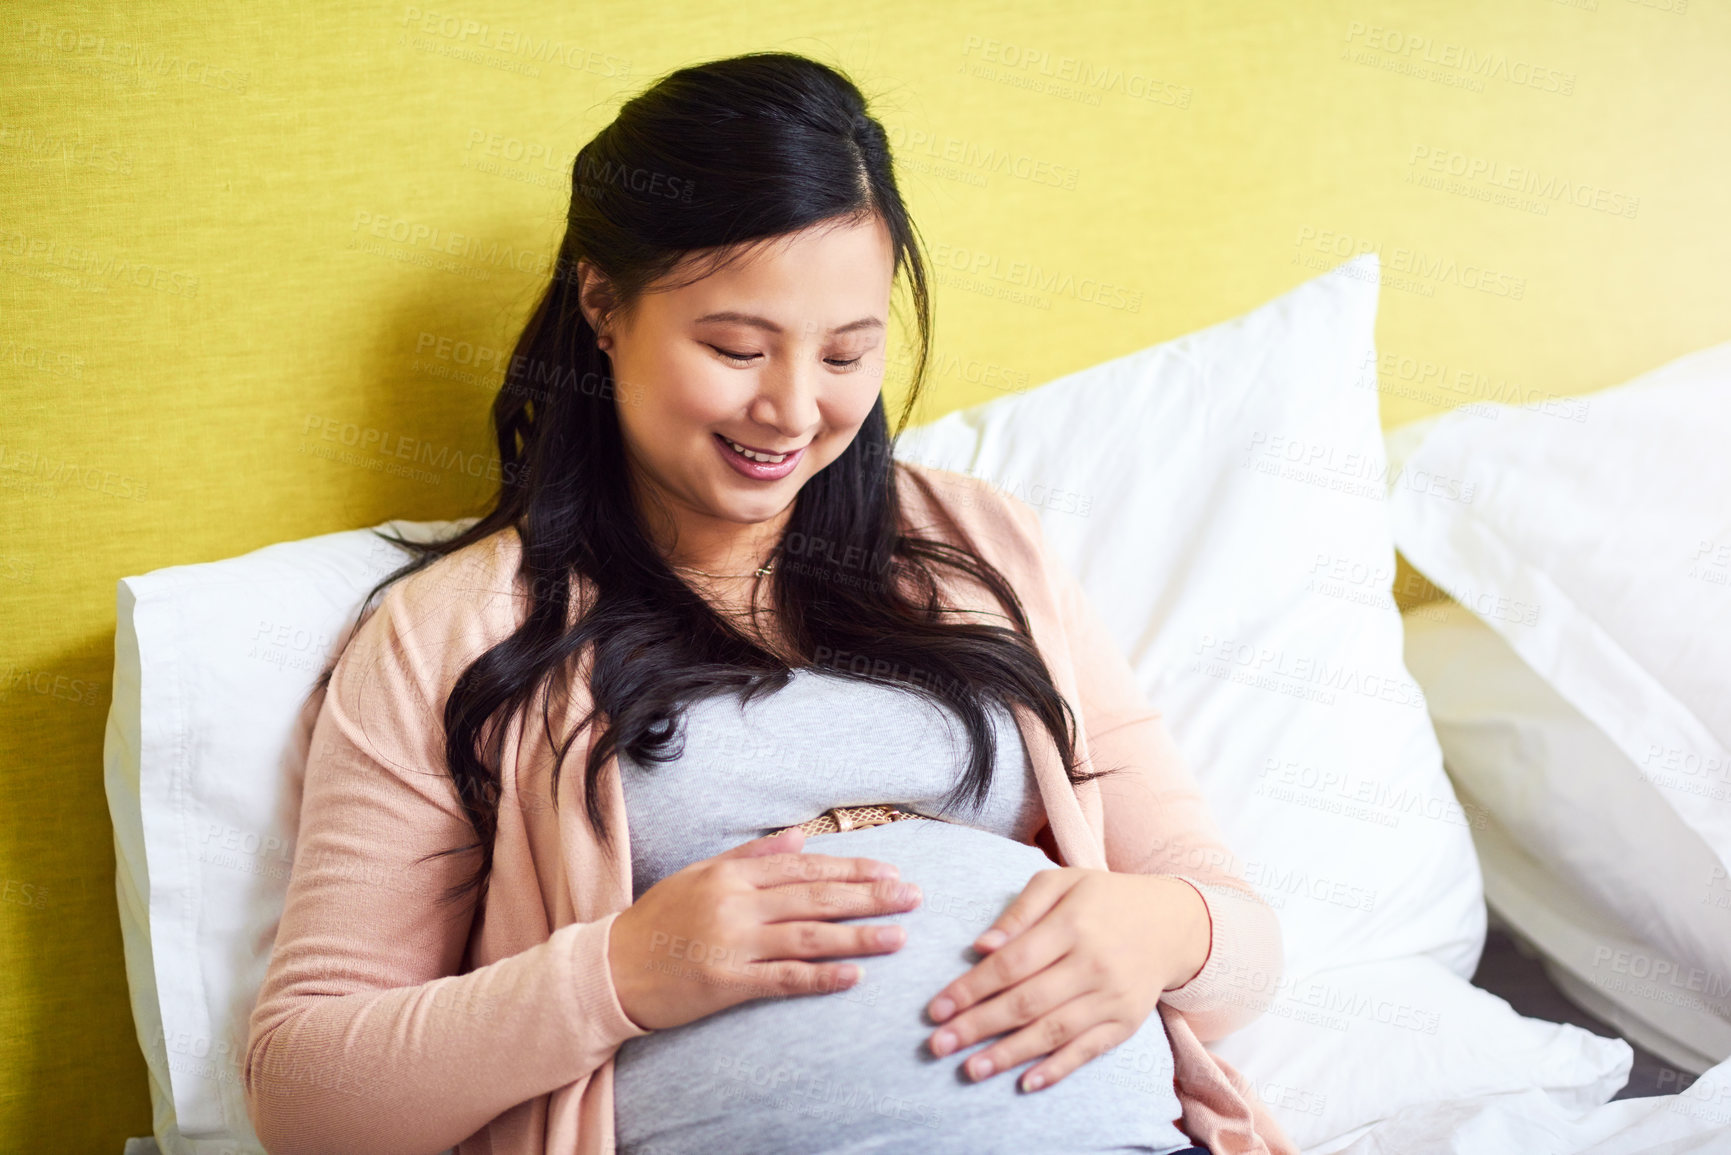 Buy stock photo Shot of a pregnant woman relaxing at home